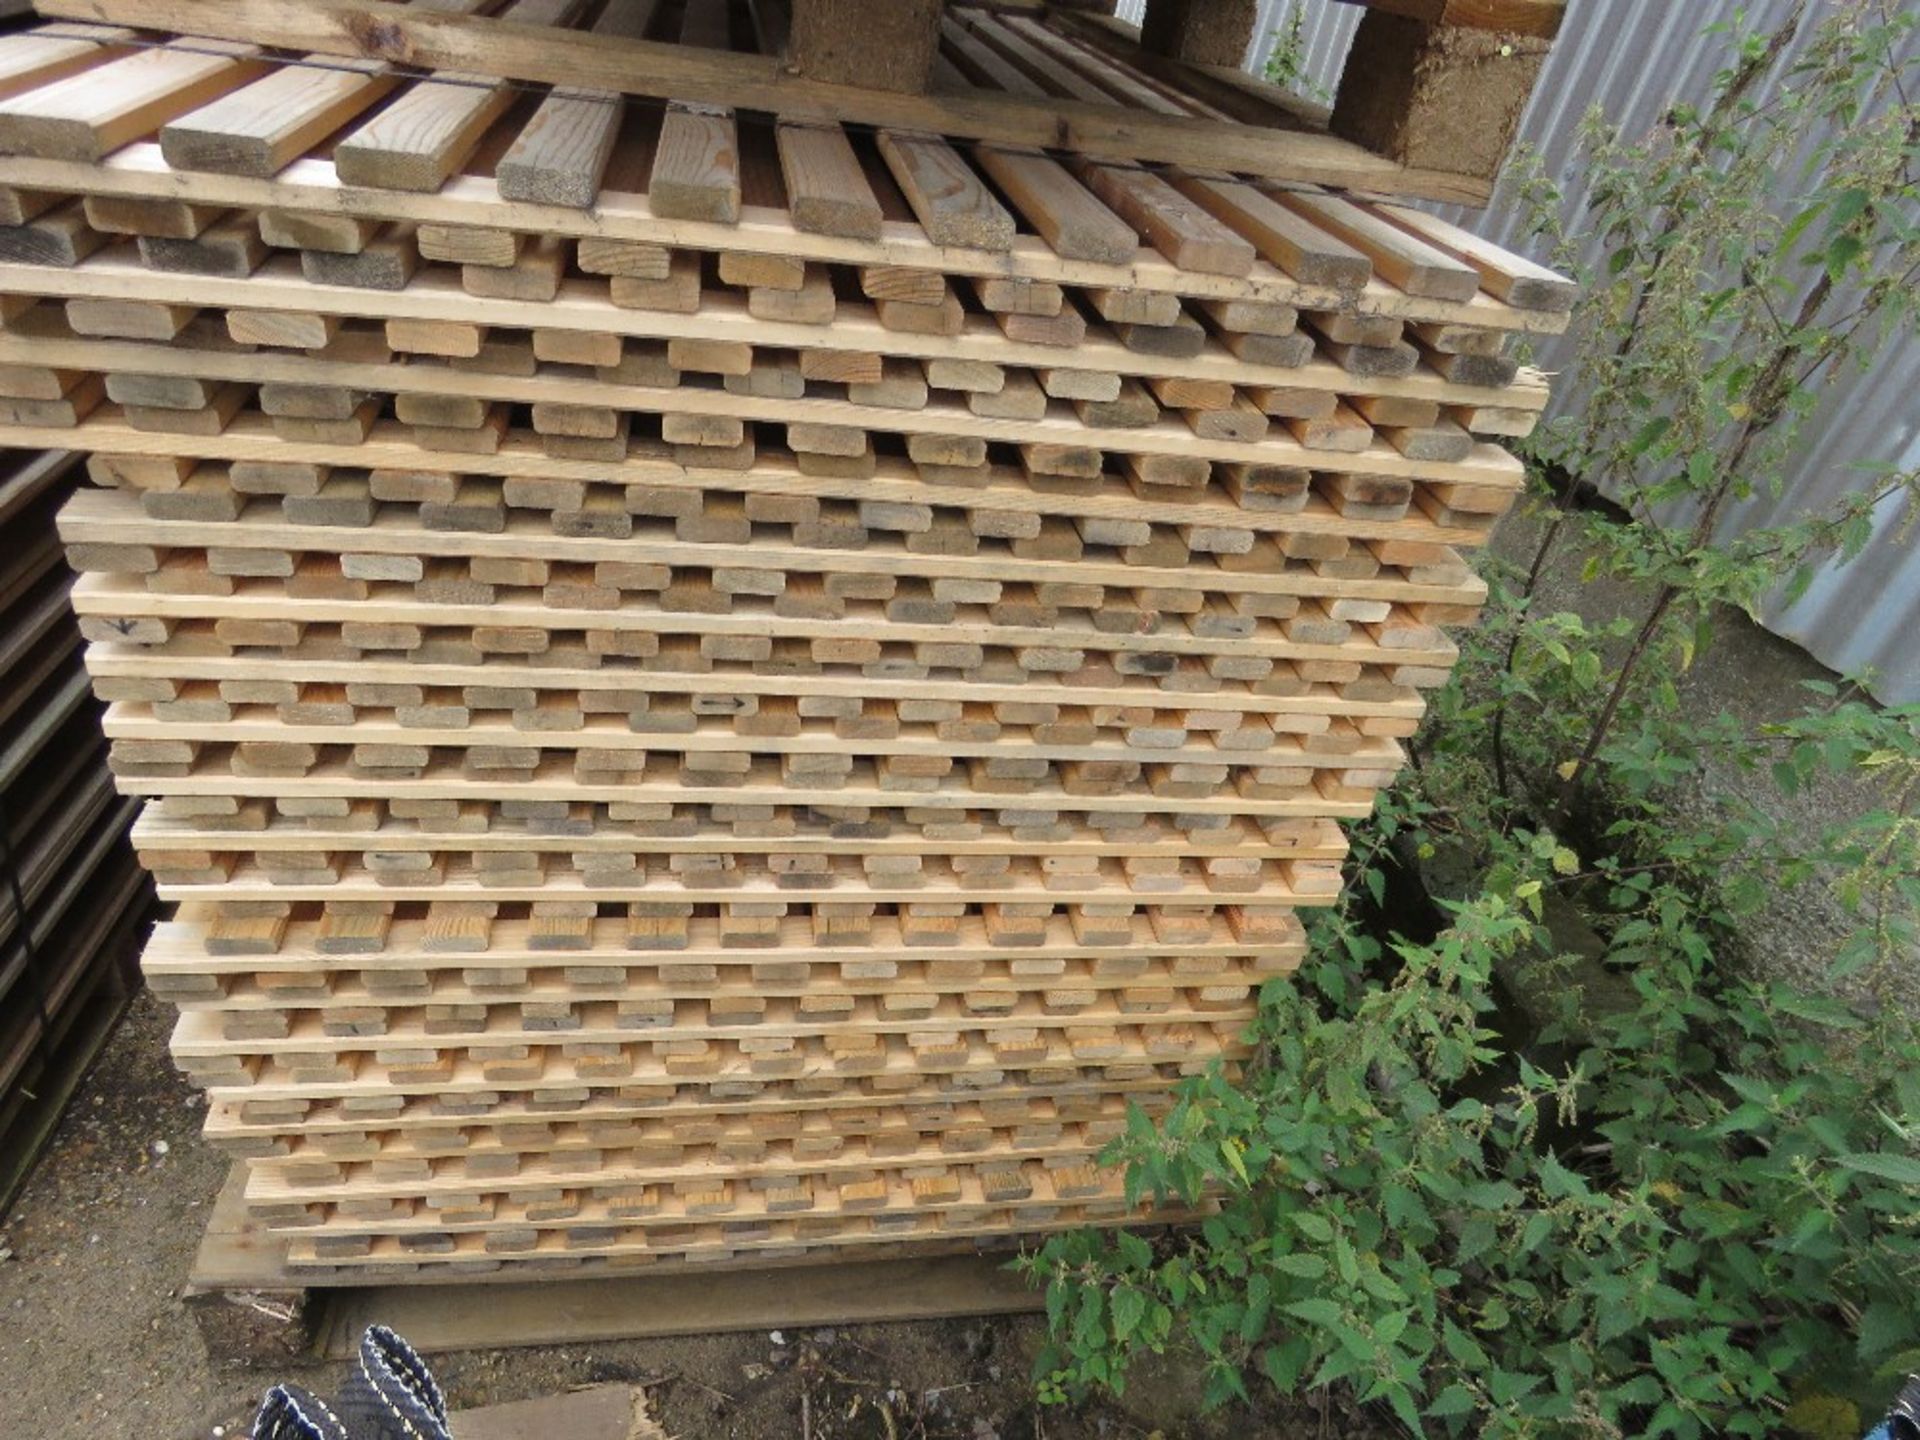 20NO HIT AND MISS SLATTED FENCING PANELS 92CM WIDTH X 1.83M HEIGHT APPROX. - Image 2 of 3